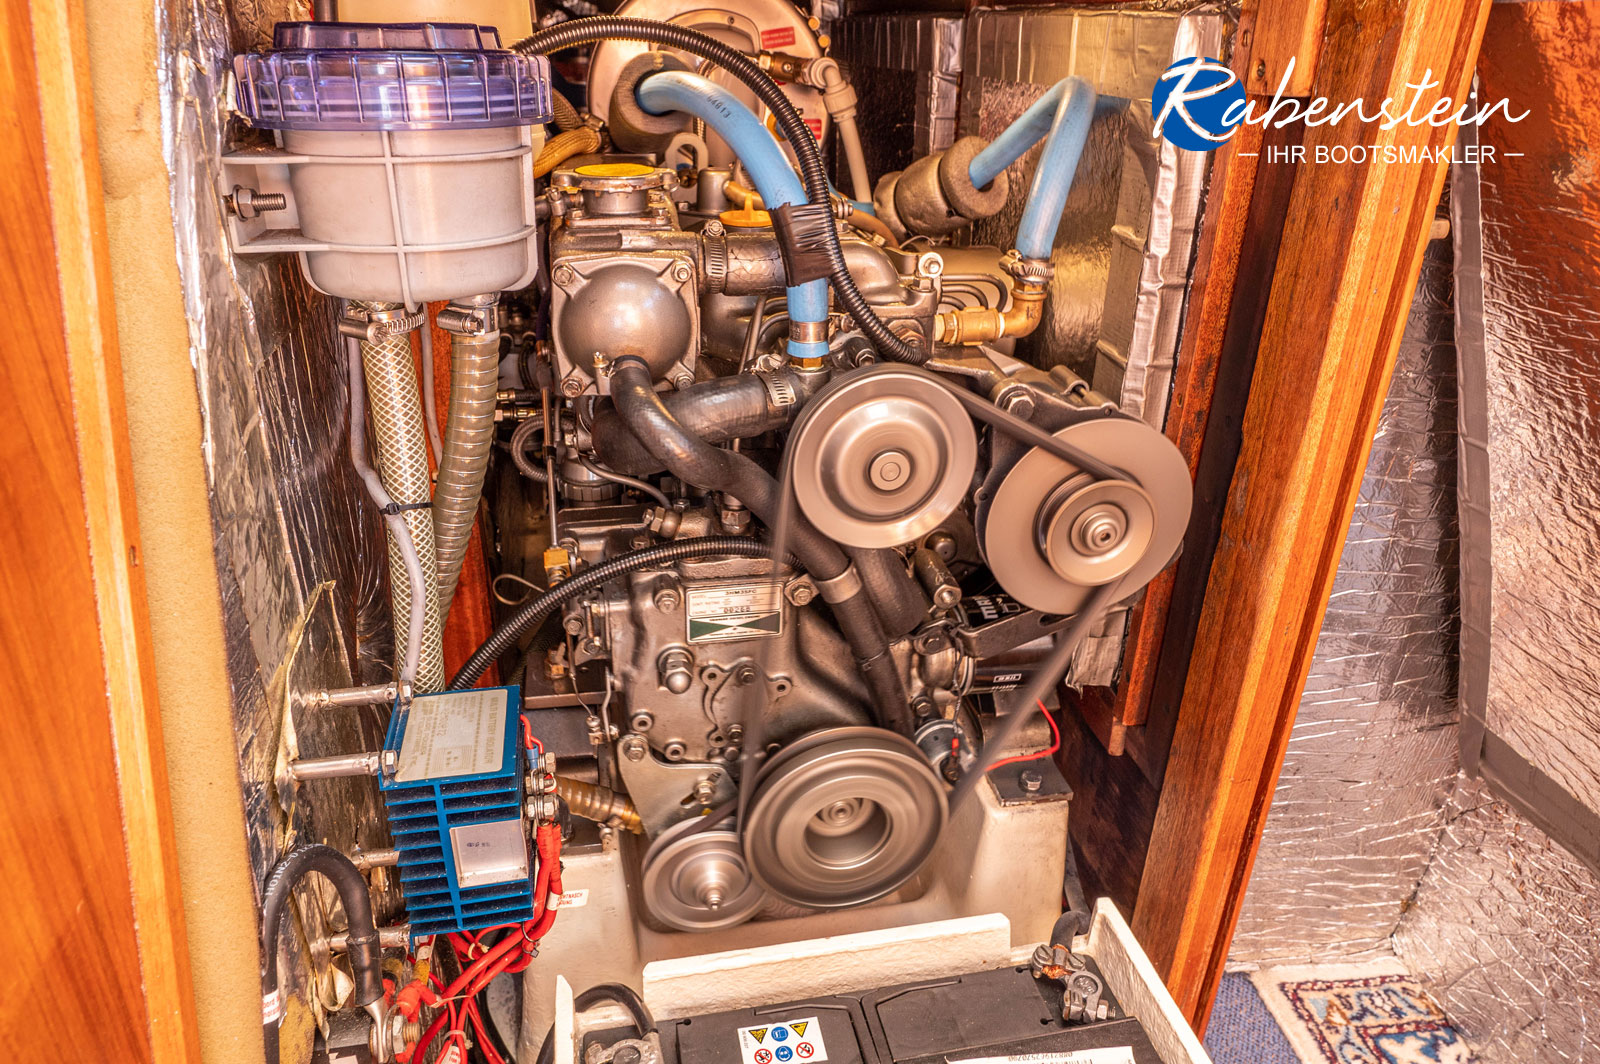 Here the running engine of a Bianca 360